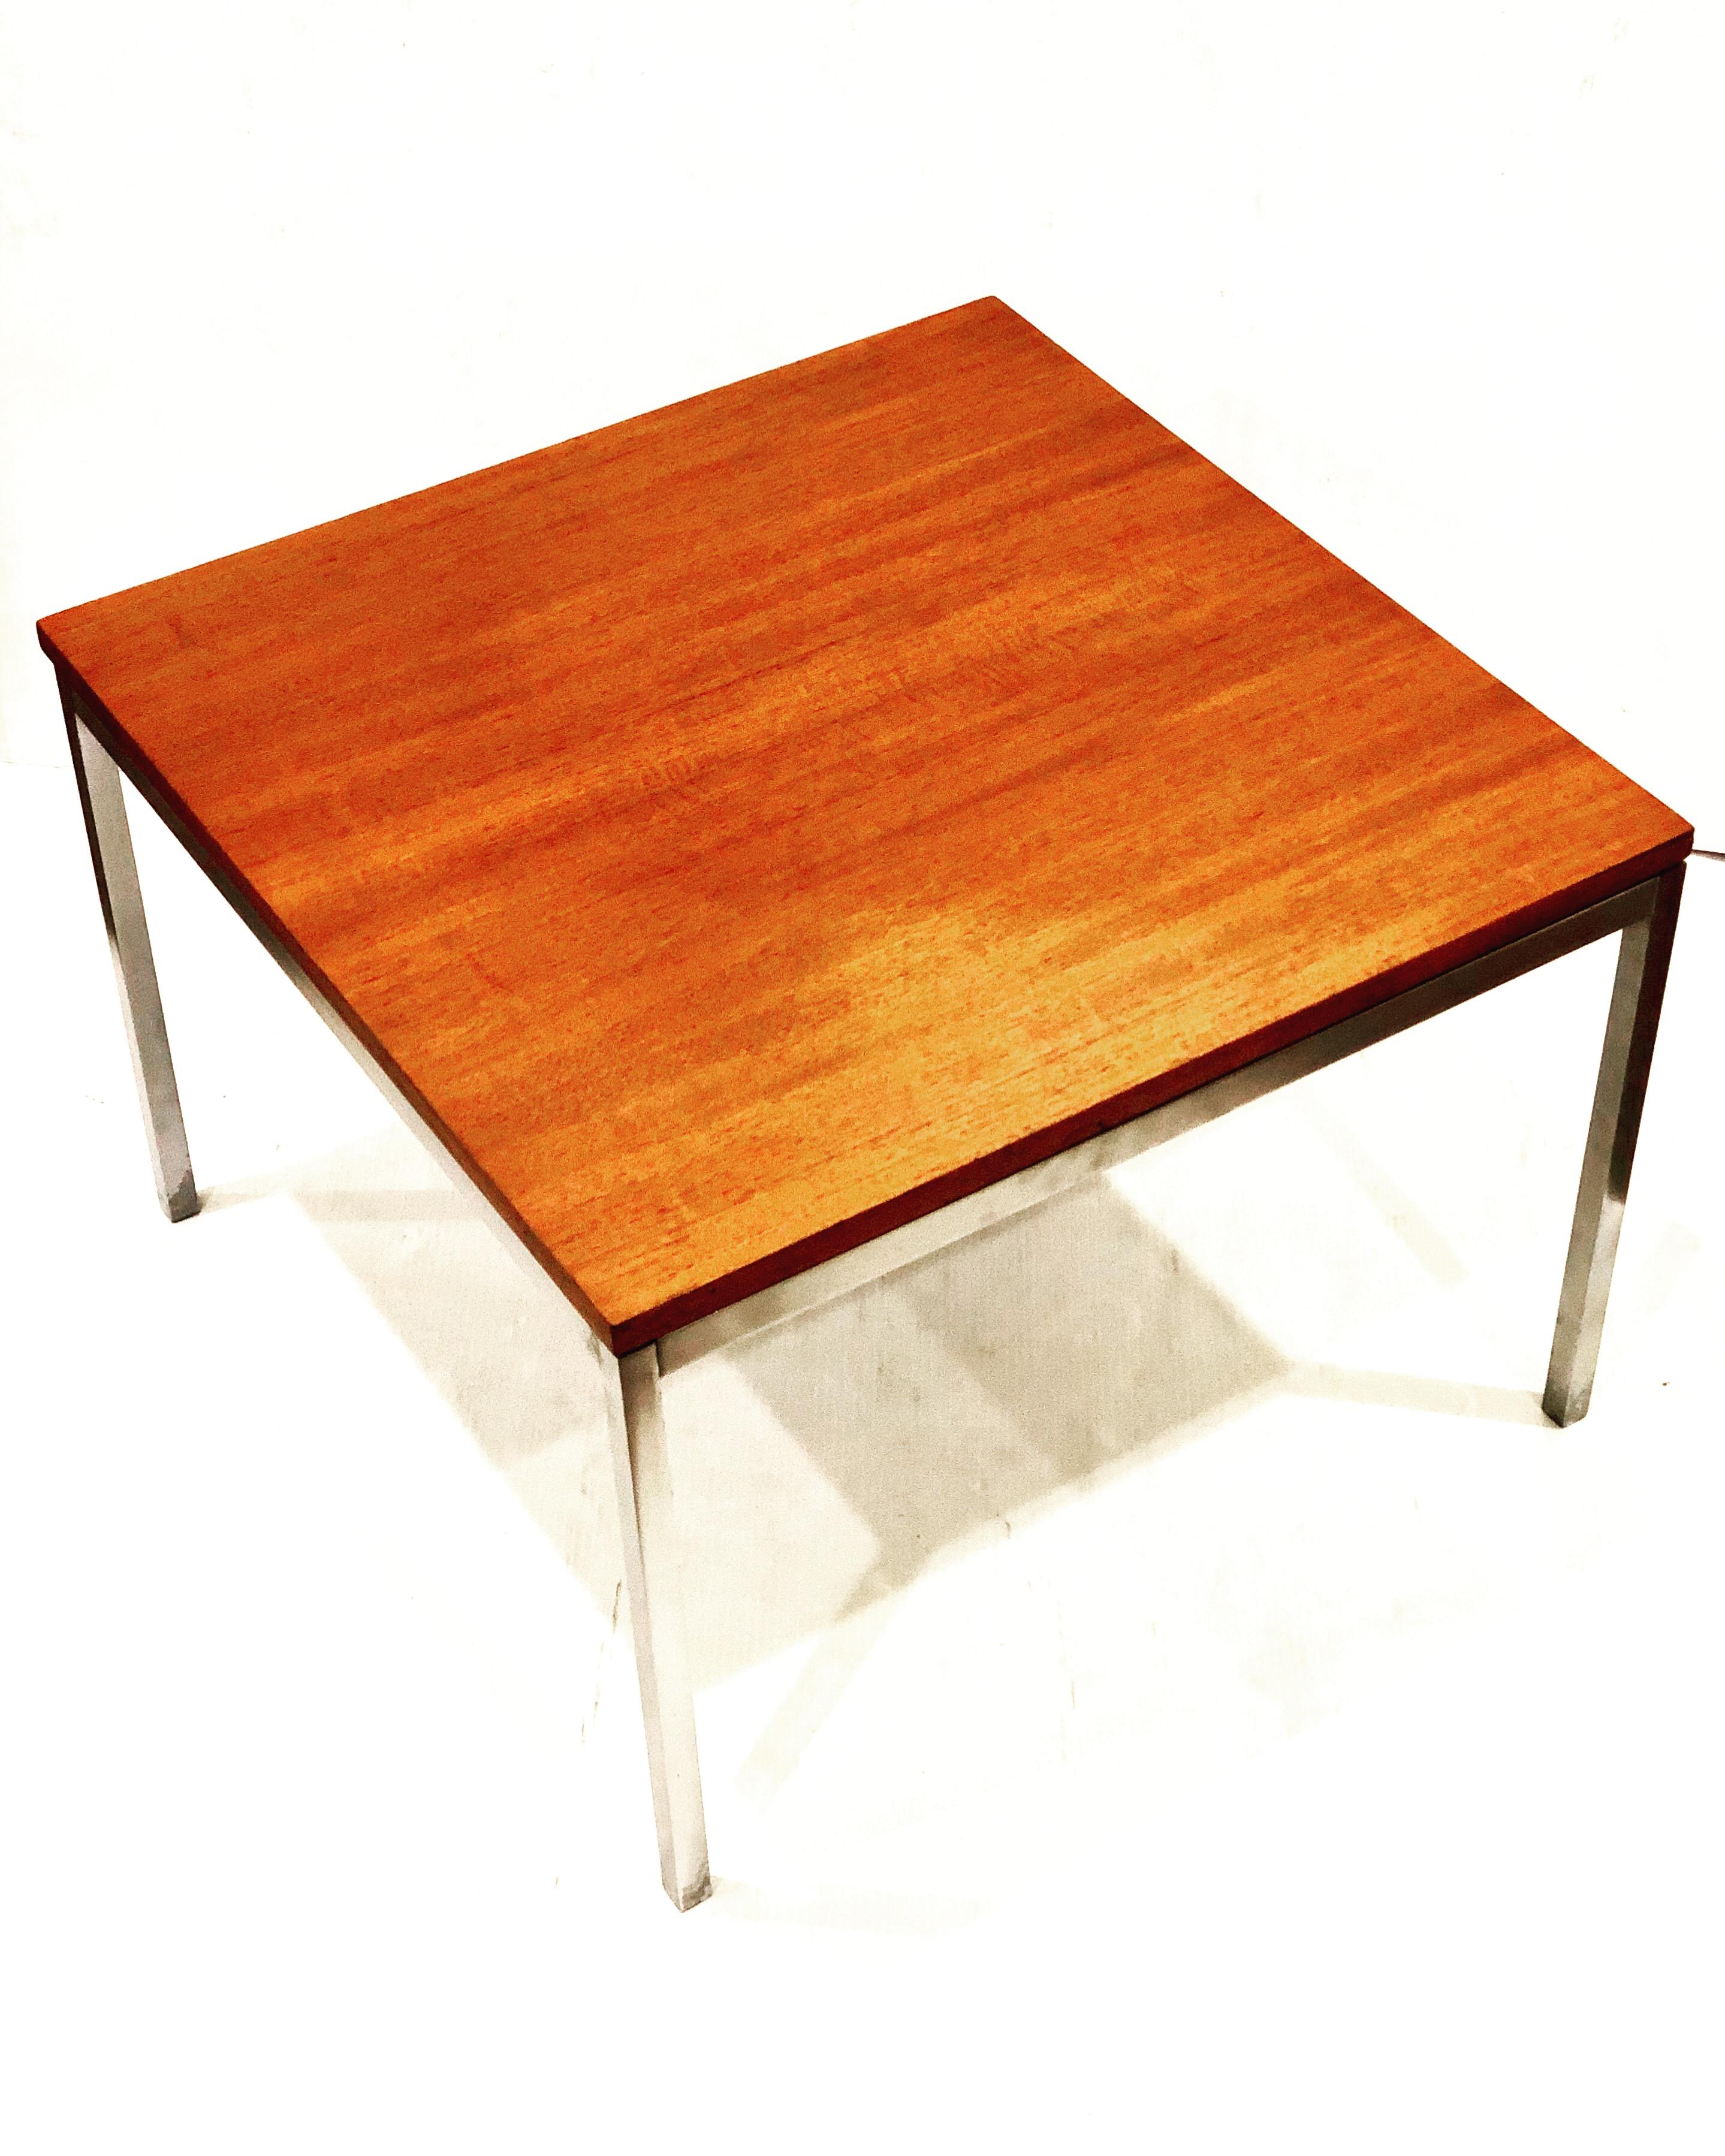 American Midcentury Small Square Teak Coffee Table by Knoll 1